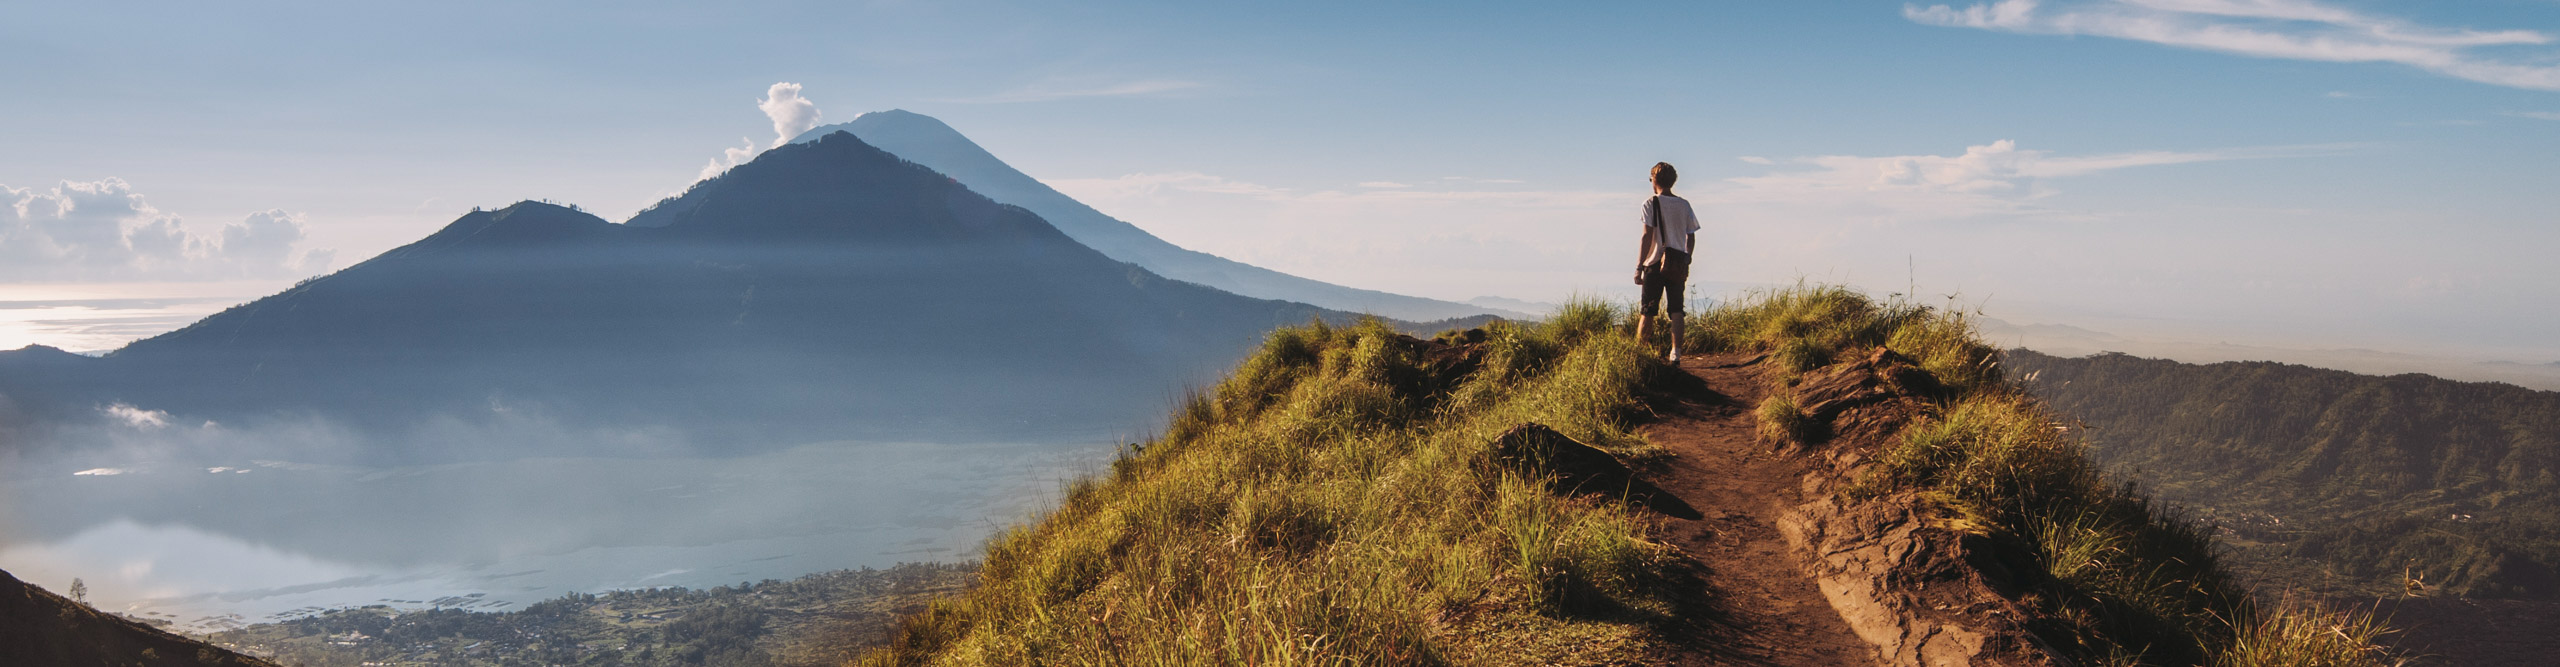 Hiker staying on top of Mount Batur, Indonesia, on a clear day at the sun is setting 